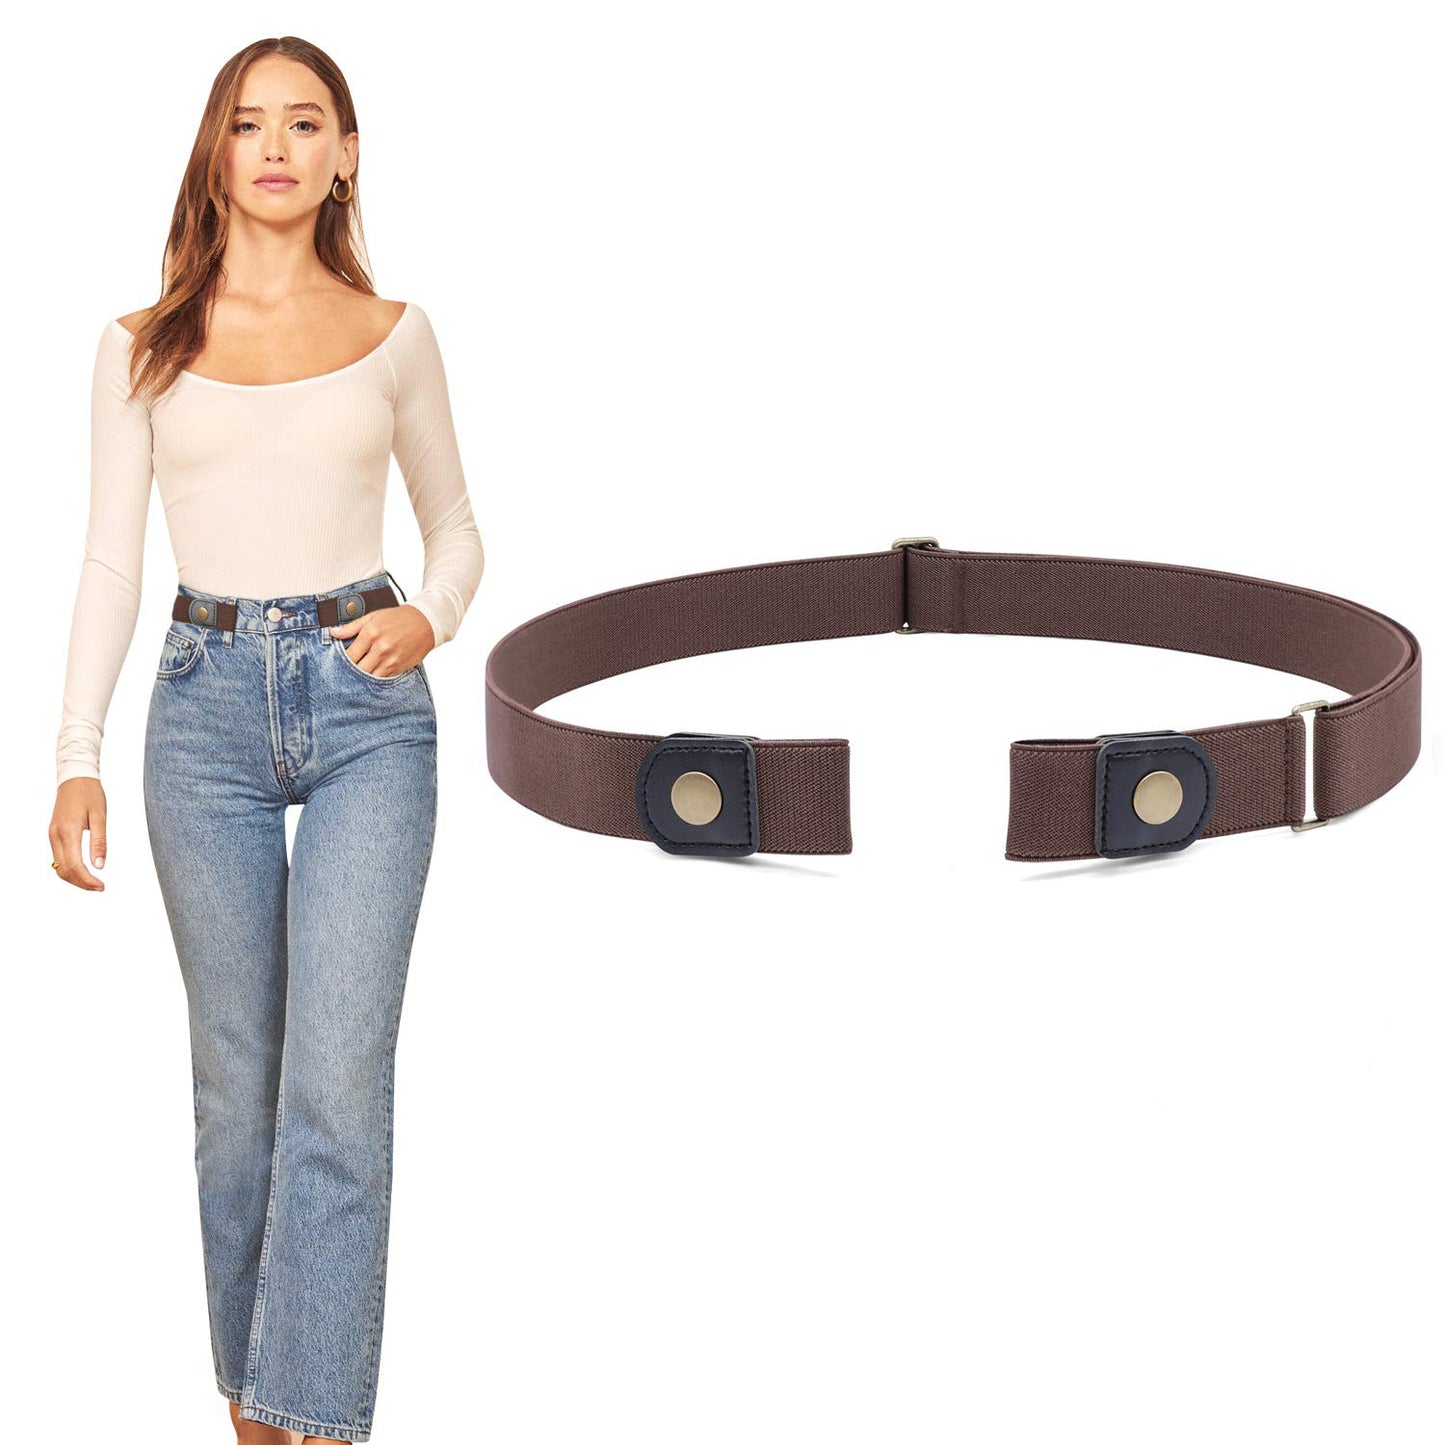 PALAY Buckle Free Belt for Women Adjustable Women's Belt Elastic Waist Belt, Invisible No Buckle Belt for Jeans Pants and Dress, Brown